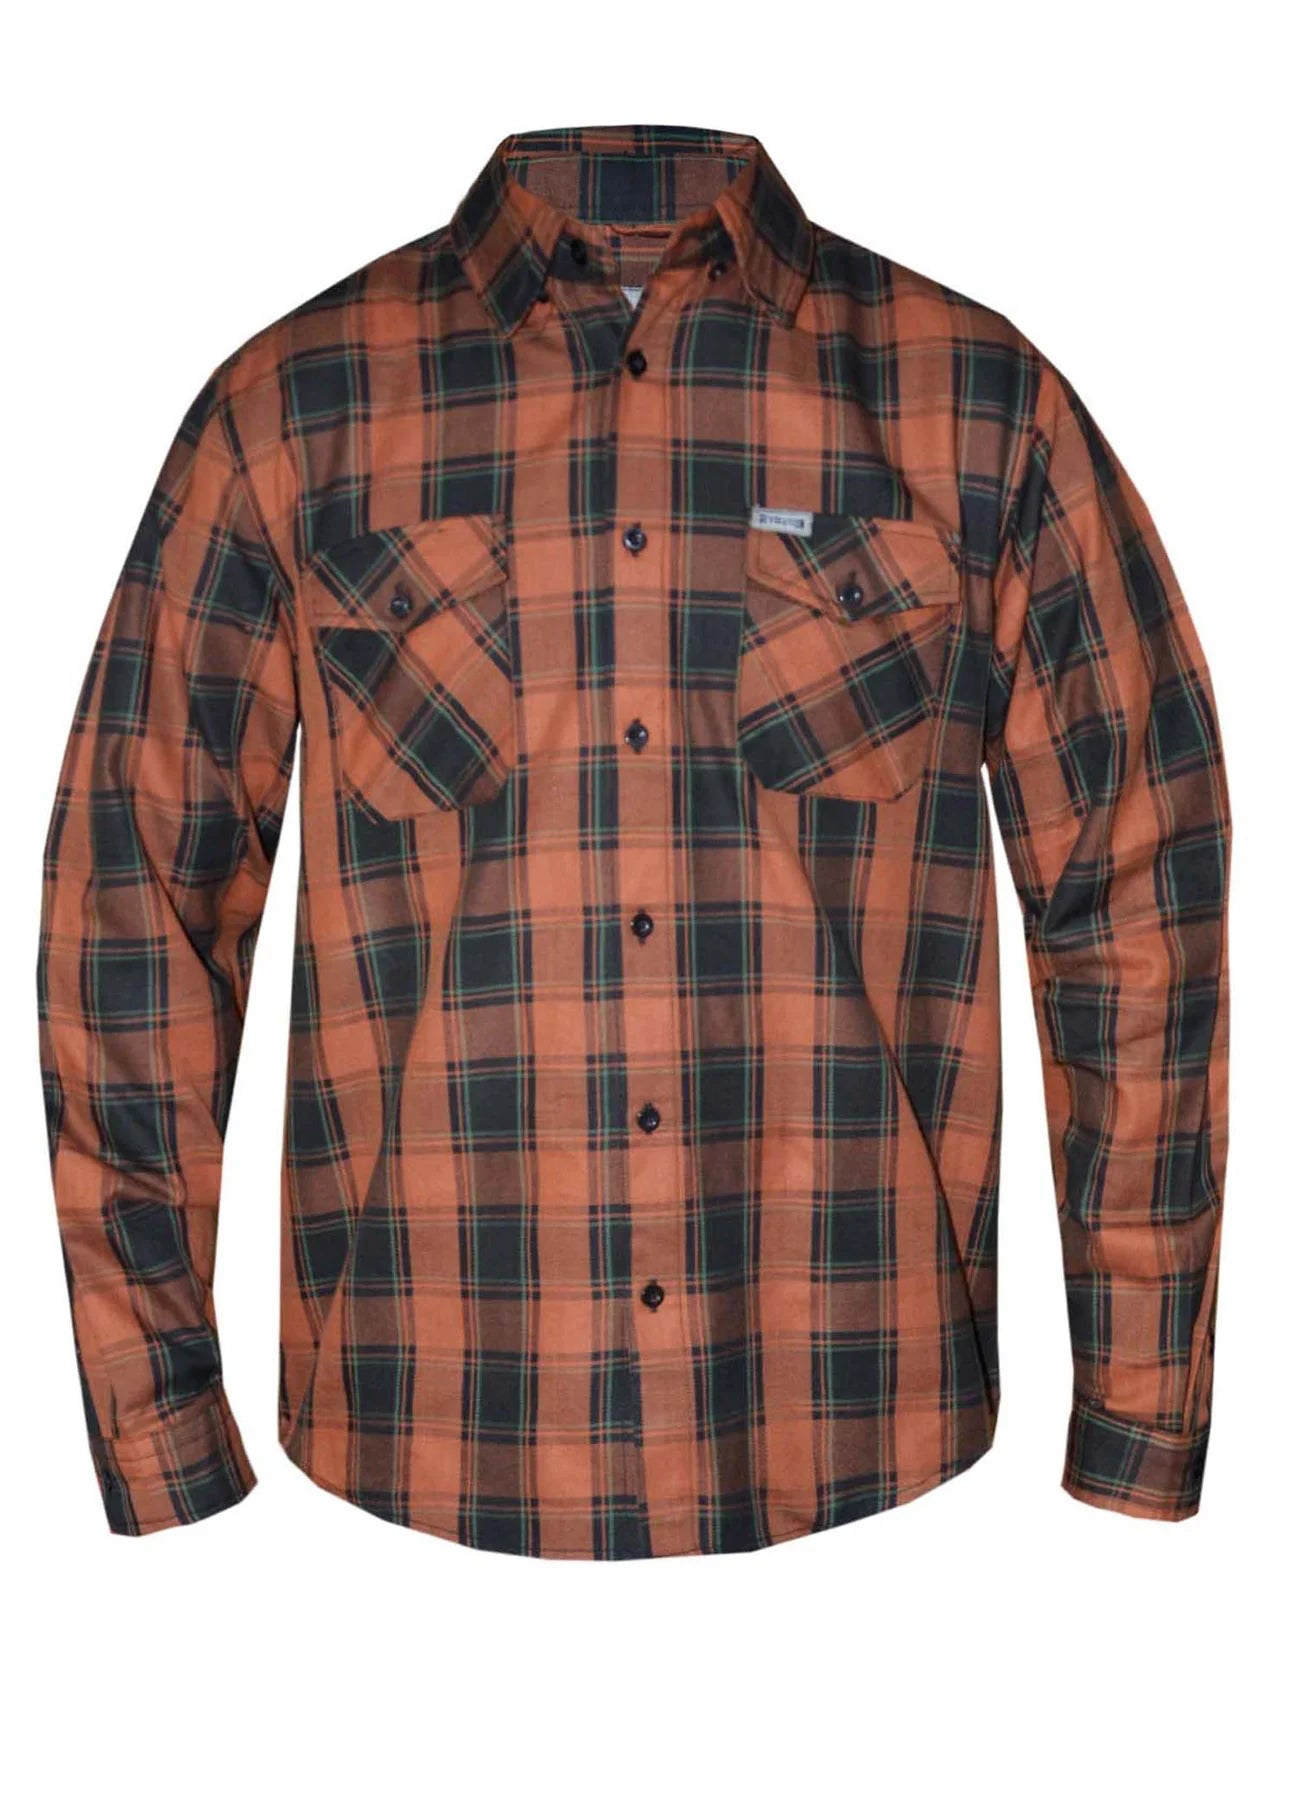 Men’s Black and Brown Riding Flannel